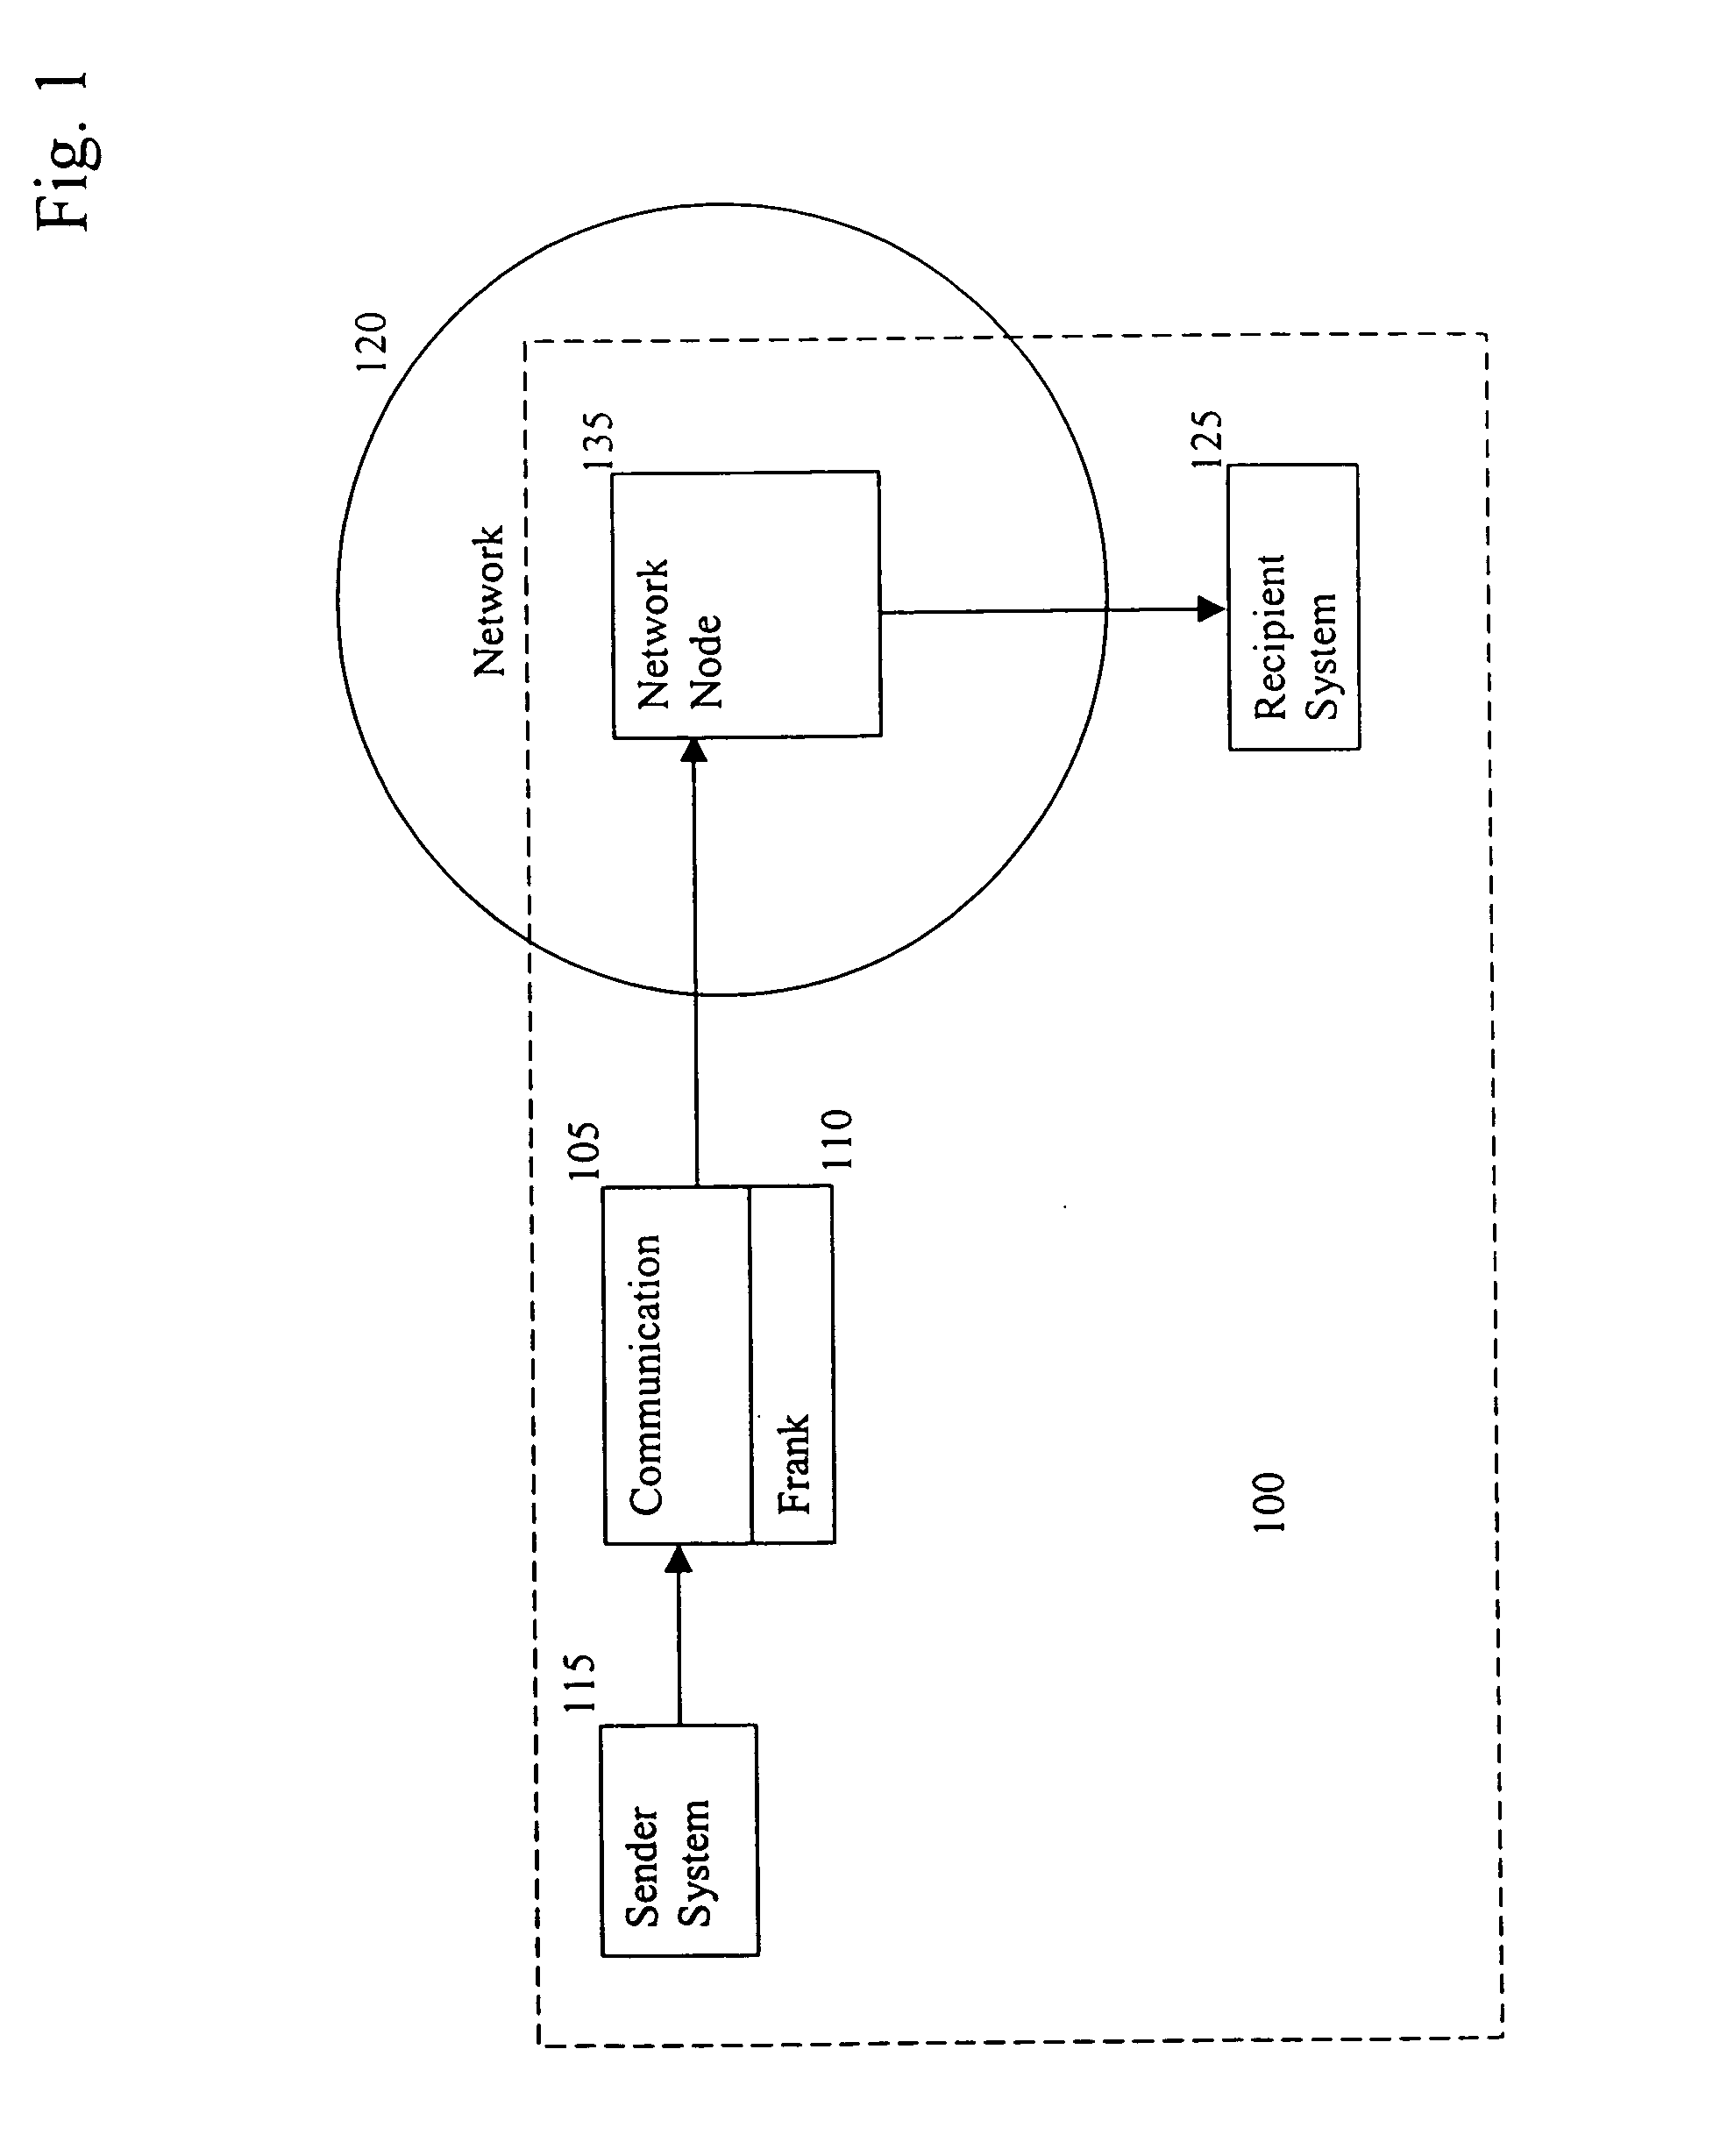 Method and apparatus for identifying, managing, and controlling communications